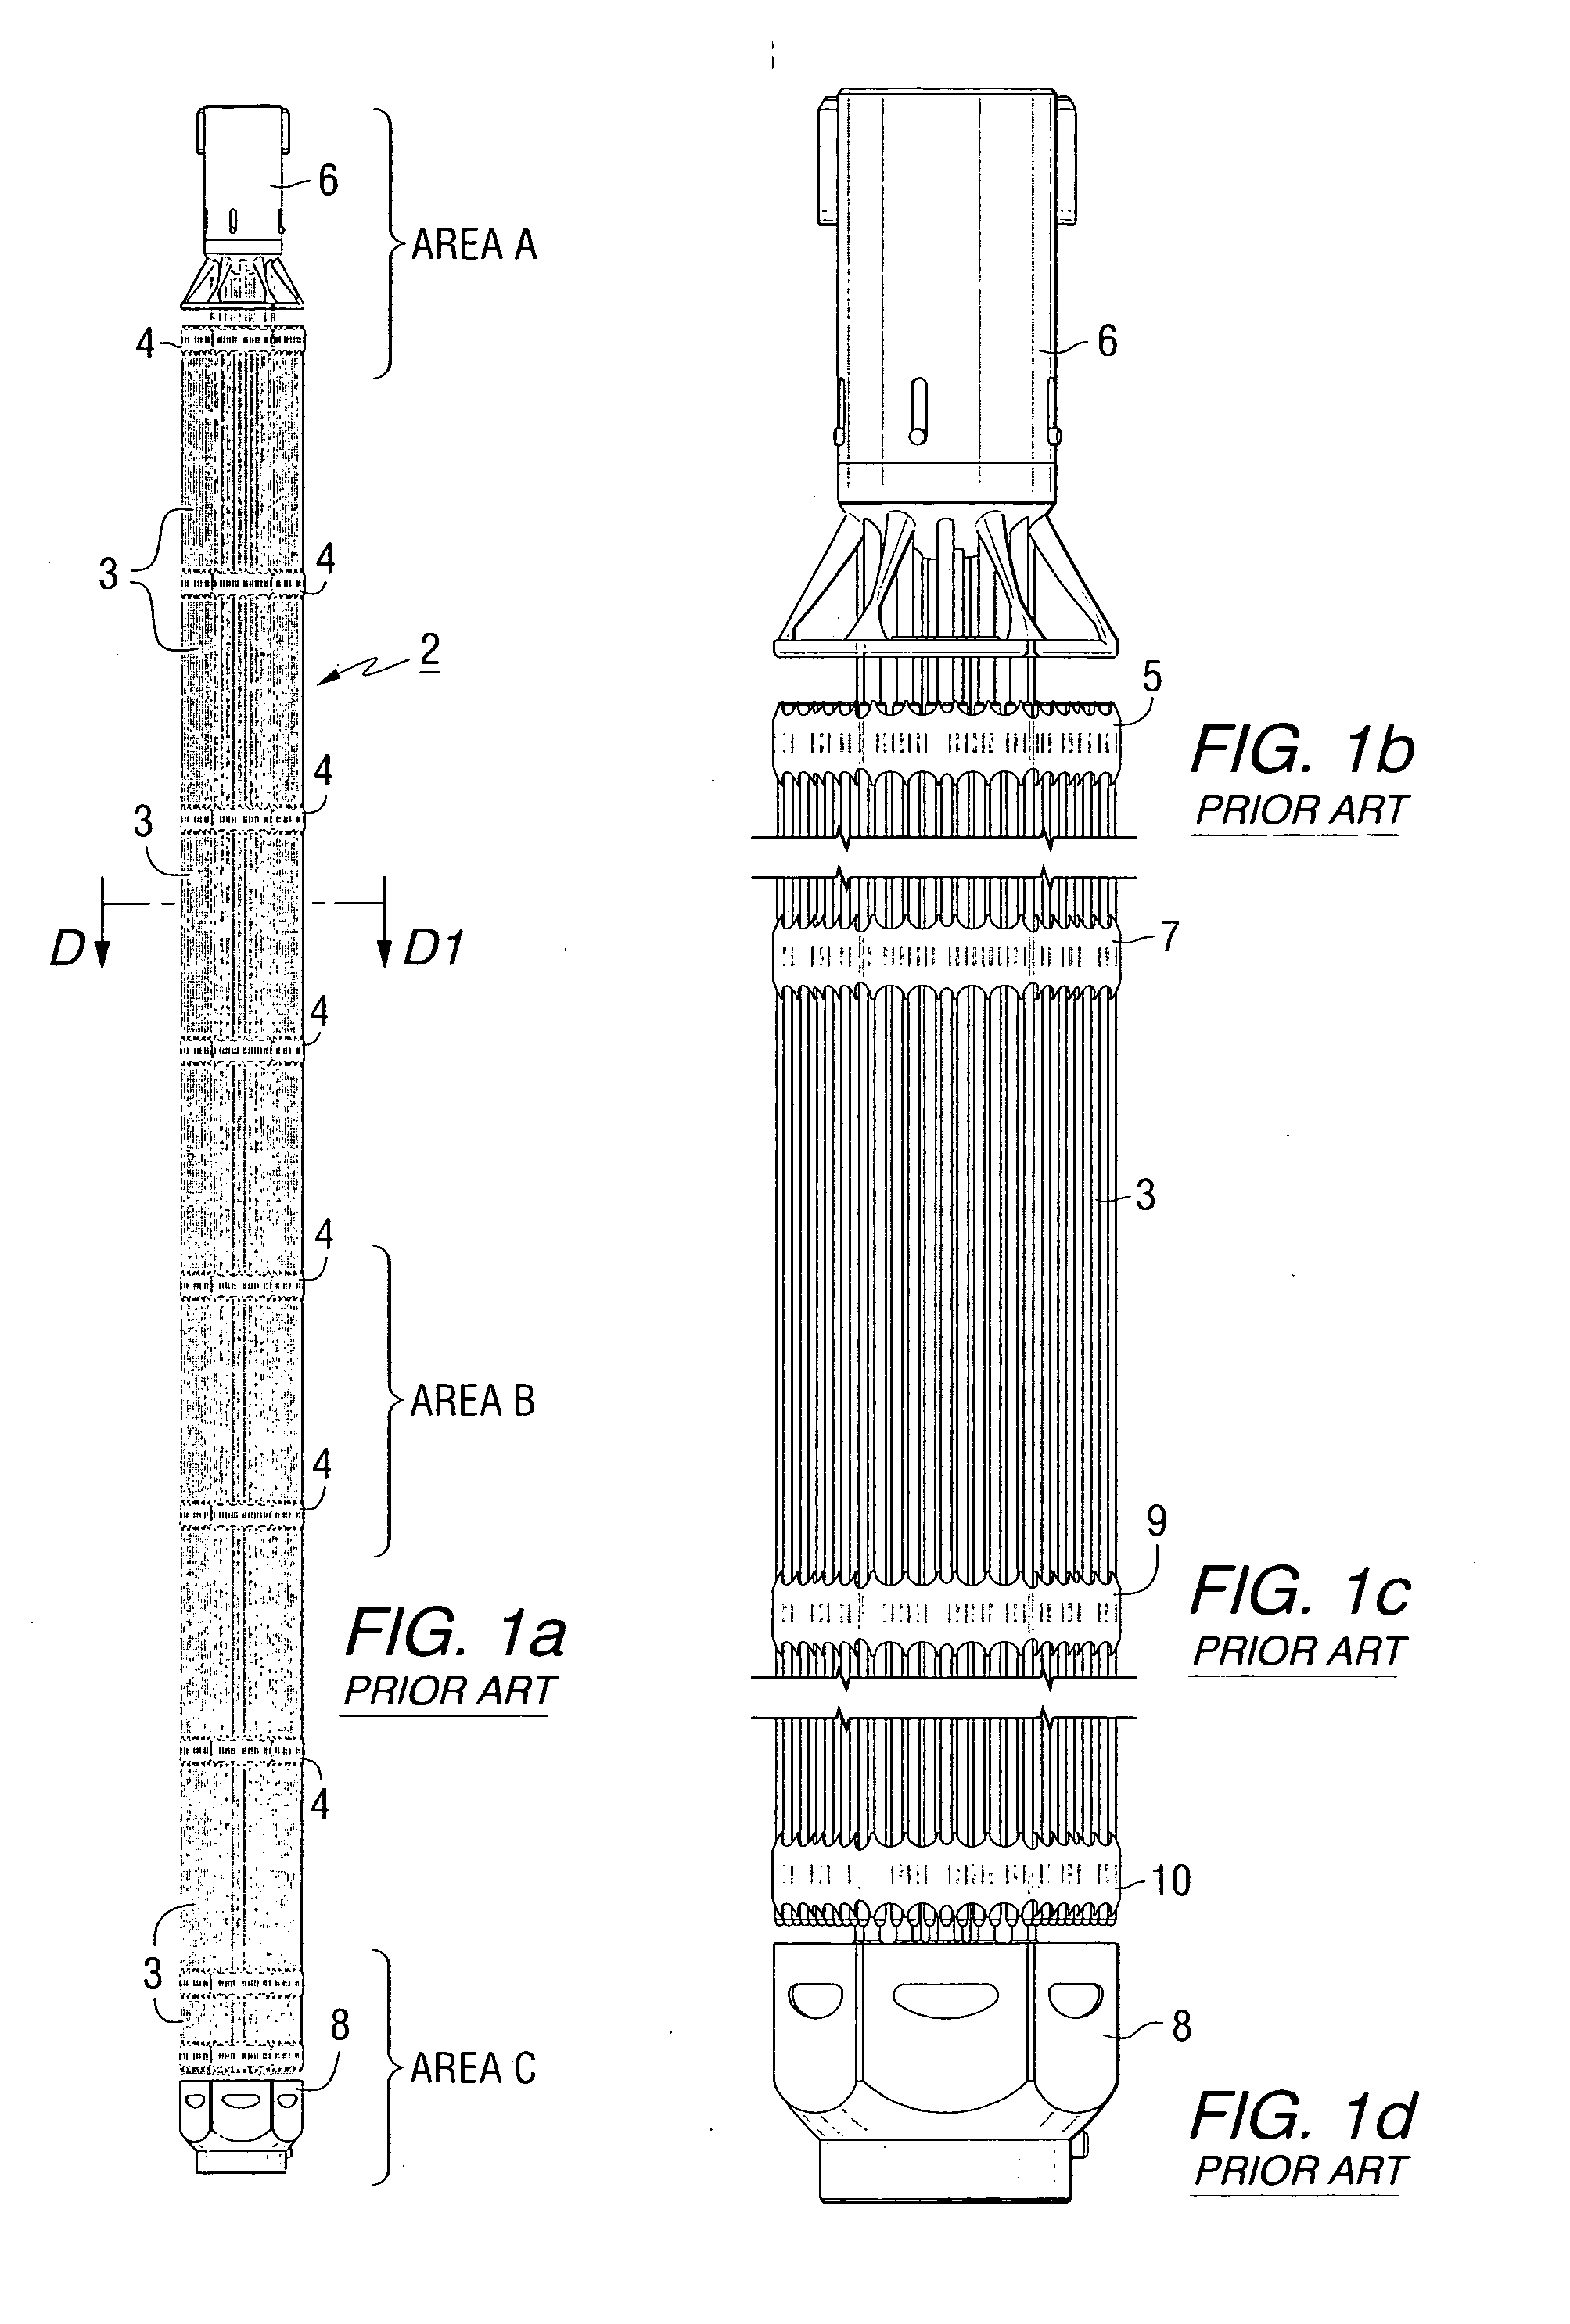 Nuclear fuel assemblies with structural support replacement rods